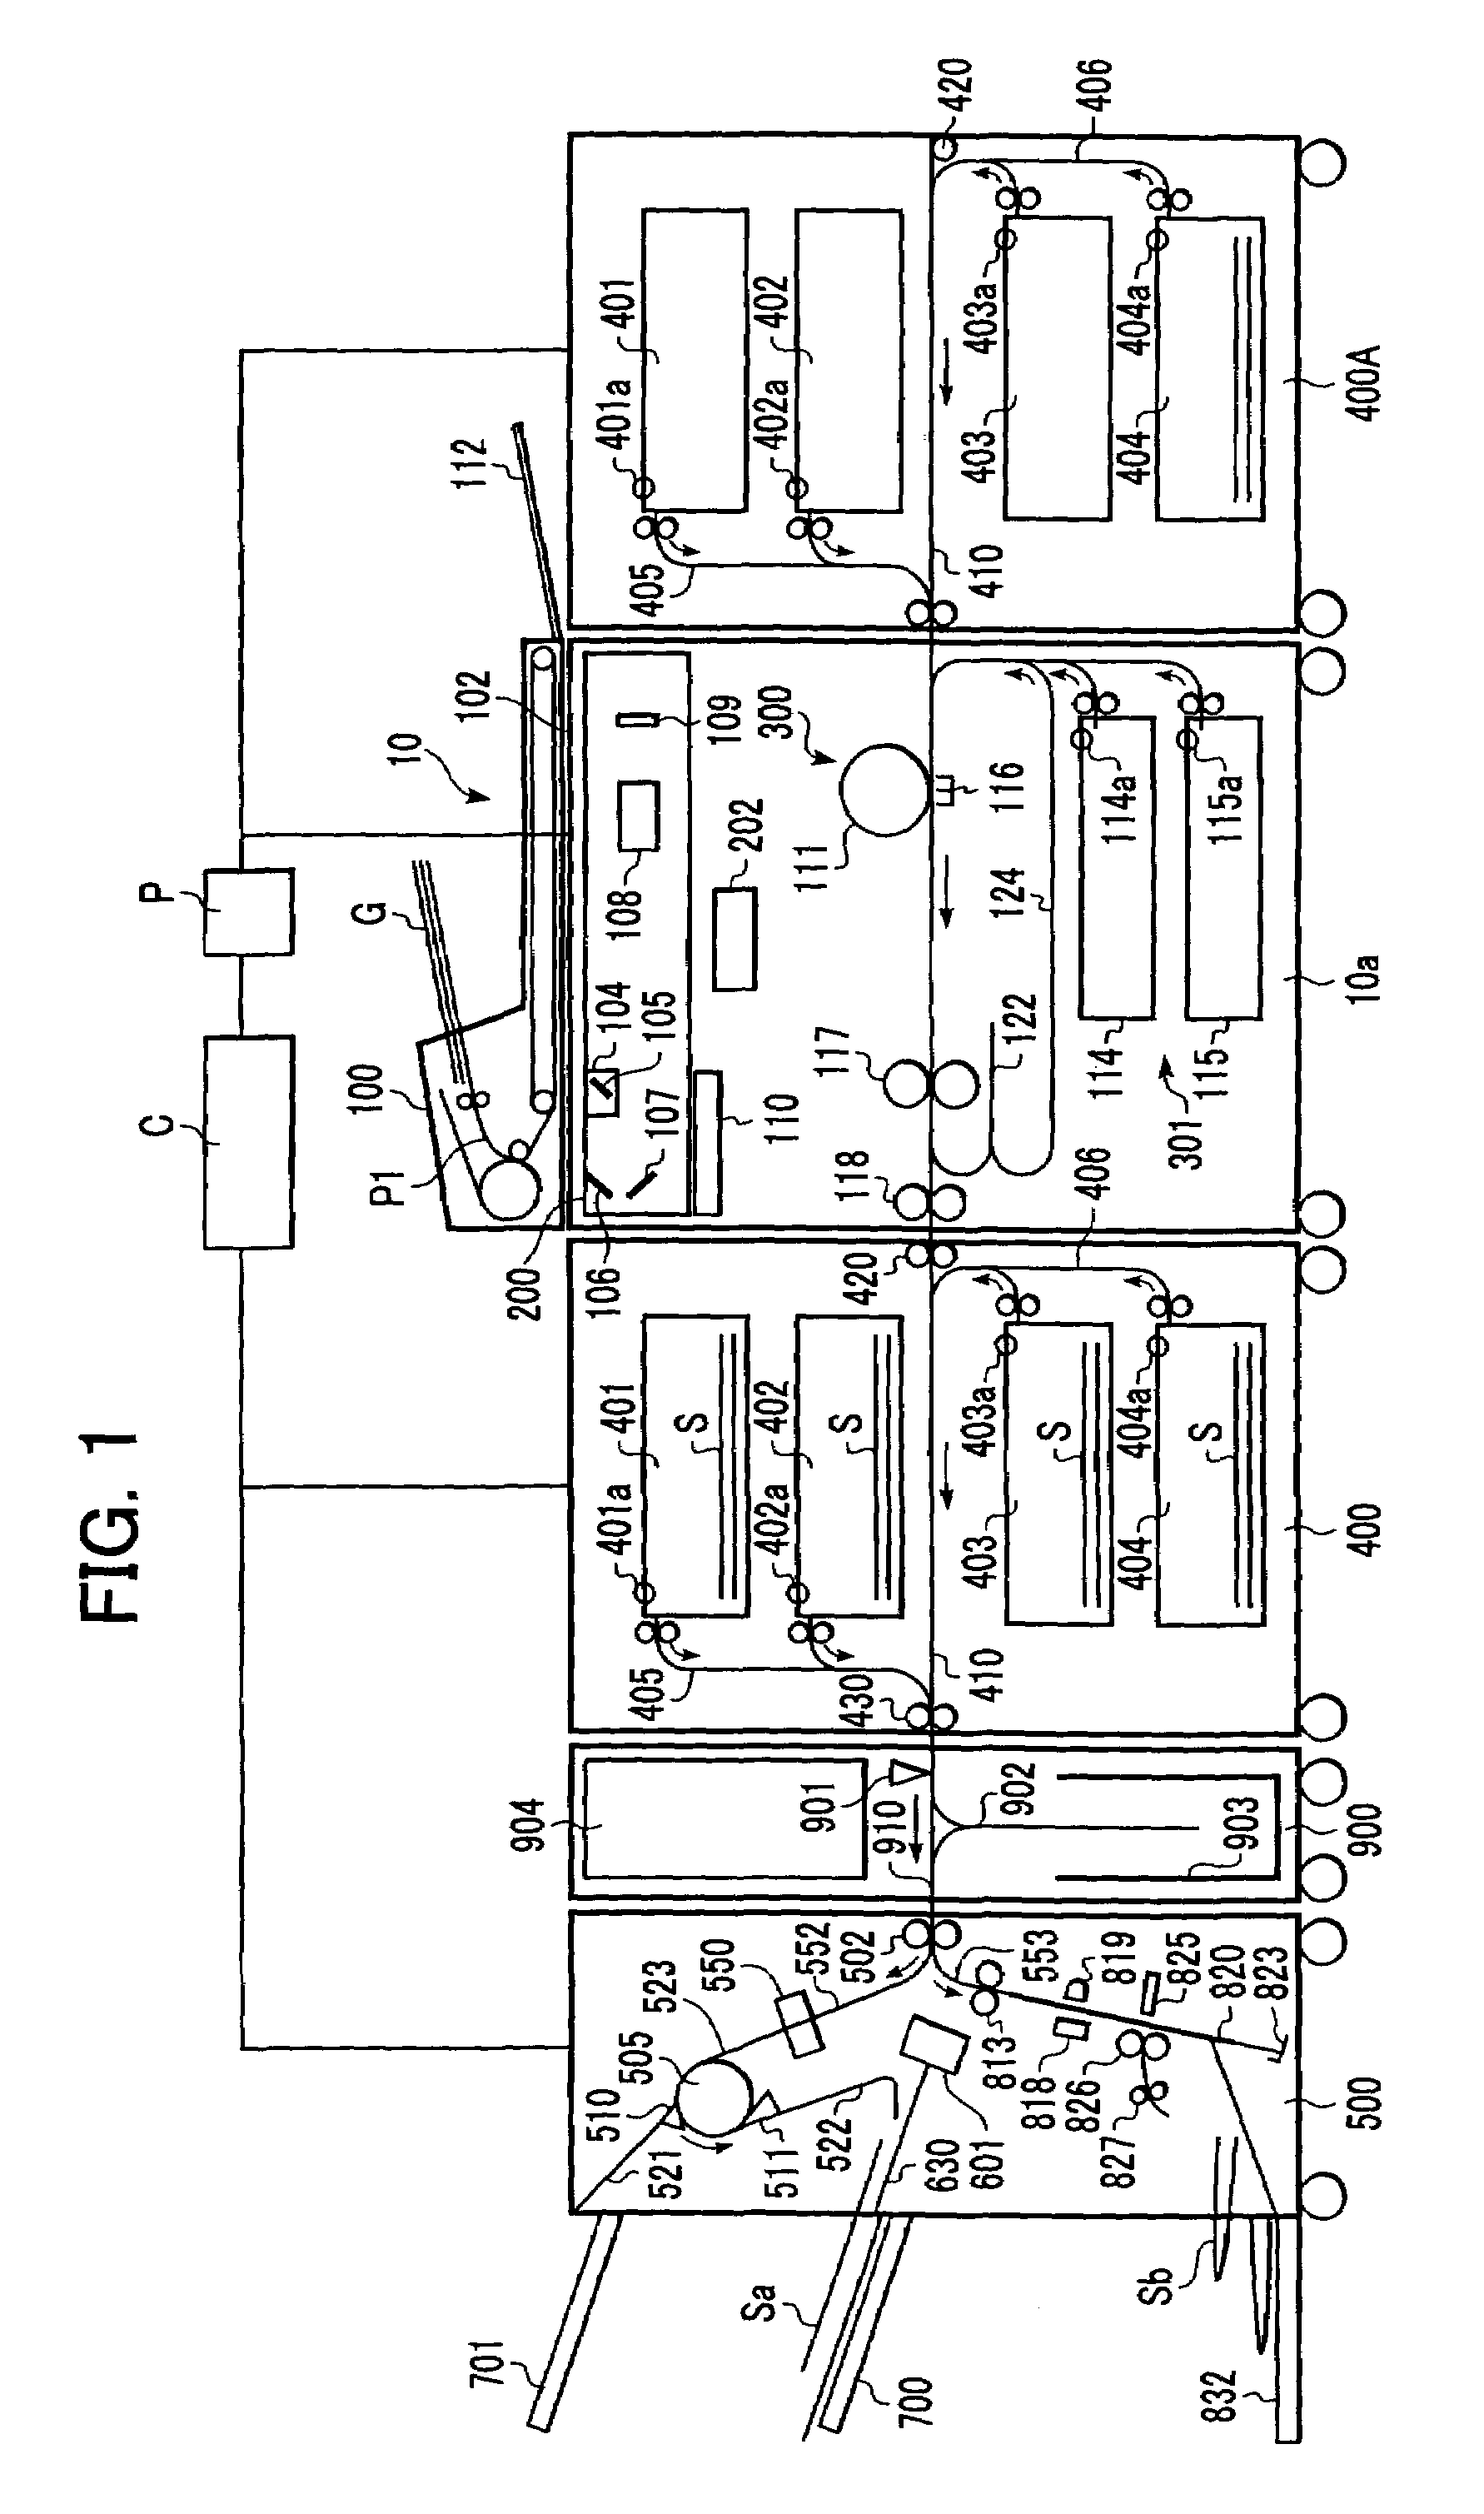 Sheet feeding device with plural sheet feeding means feeding in opposite directions to sheet post-processing system